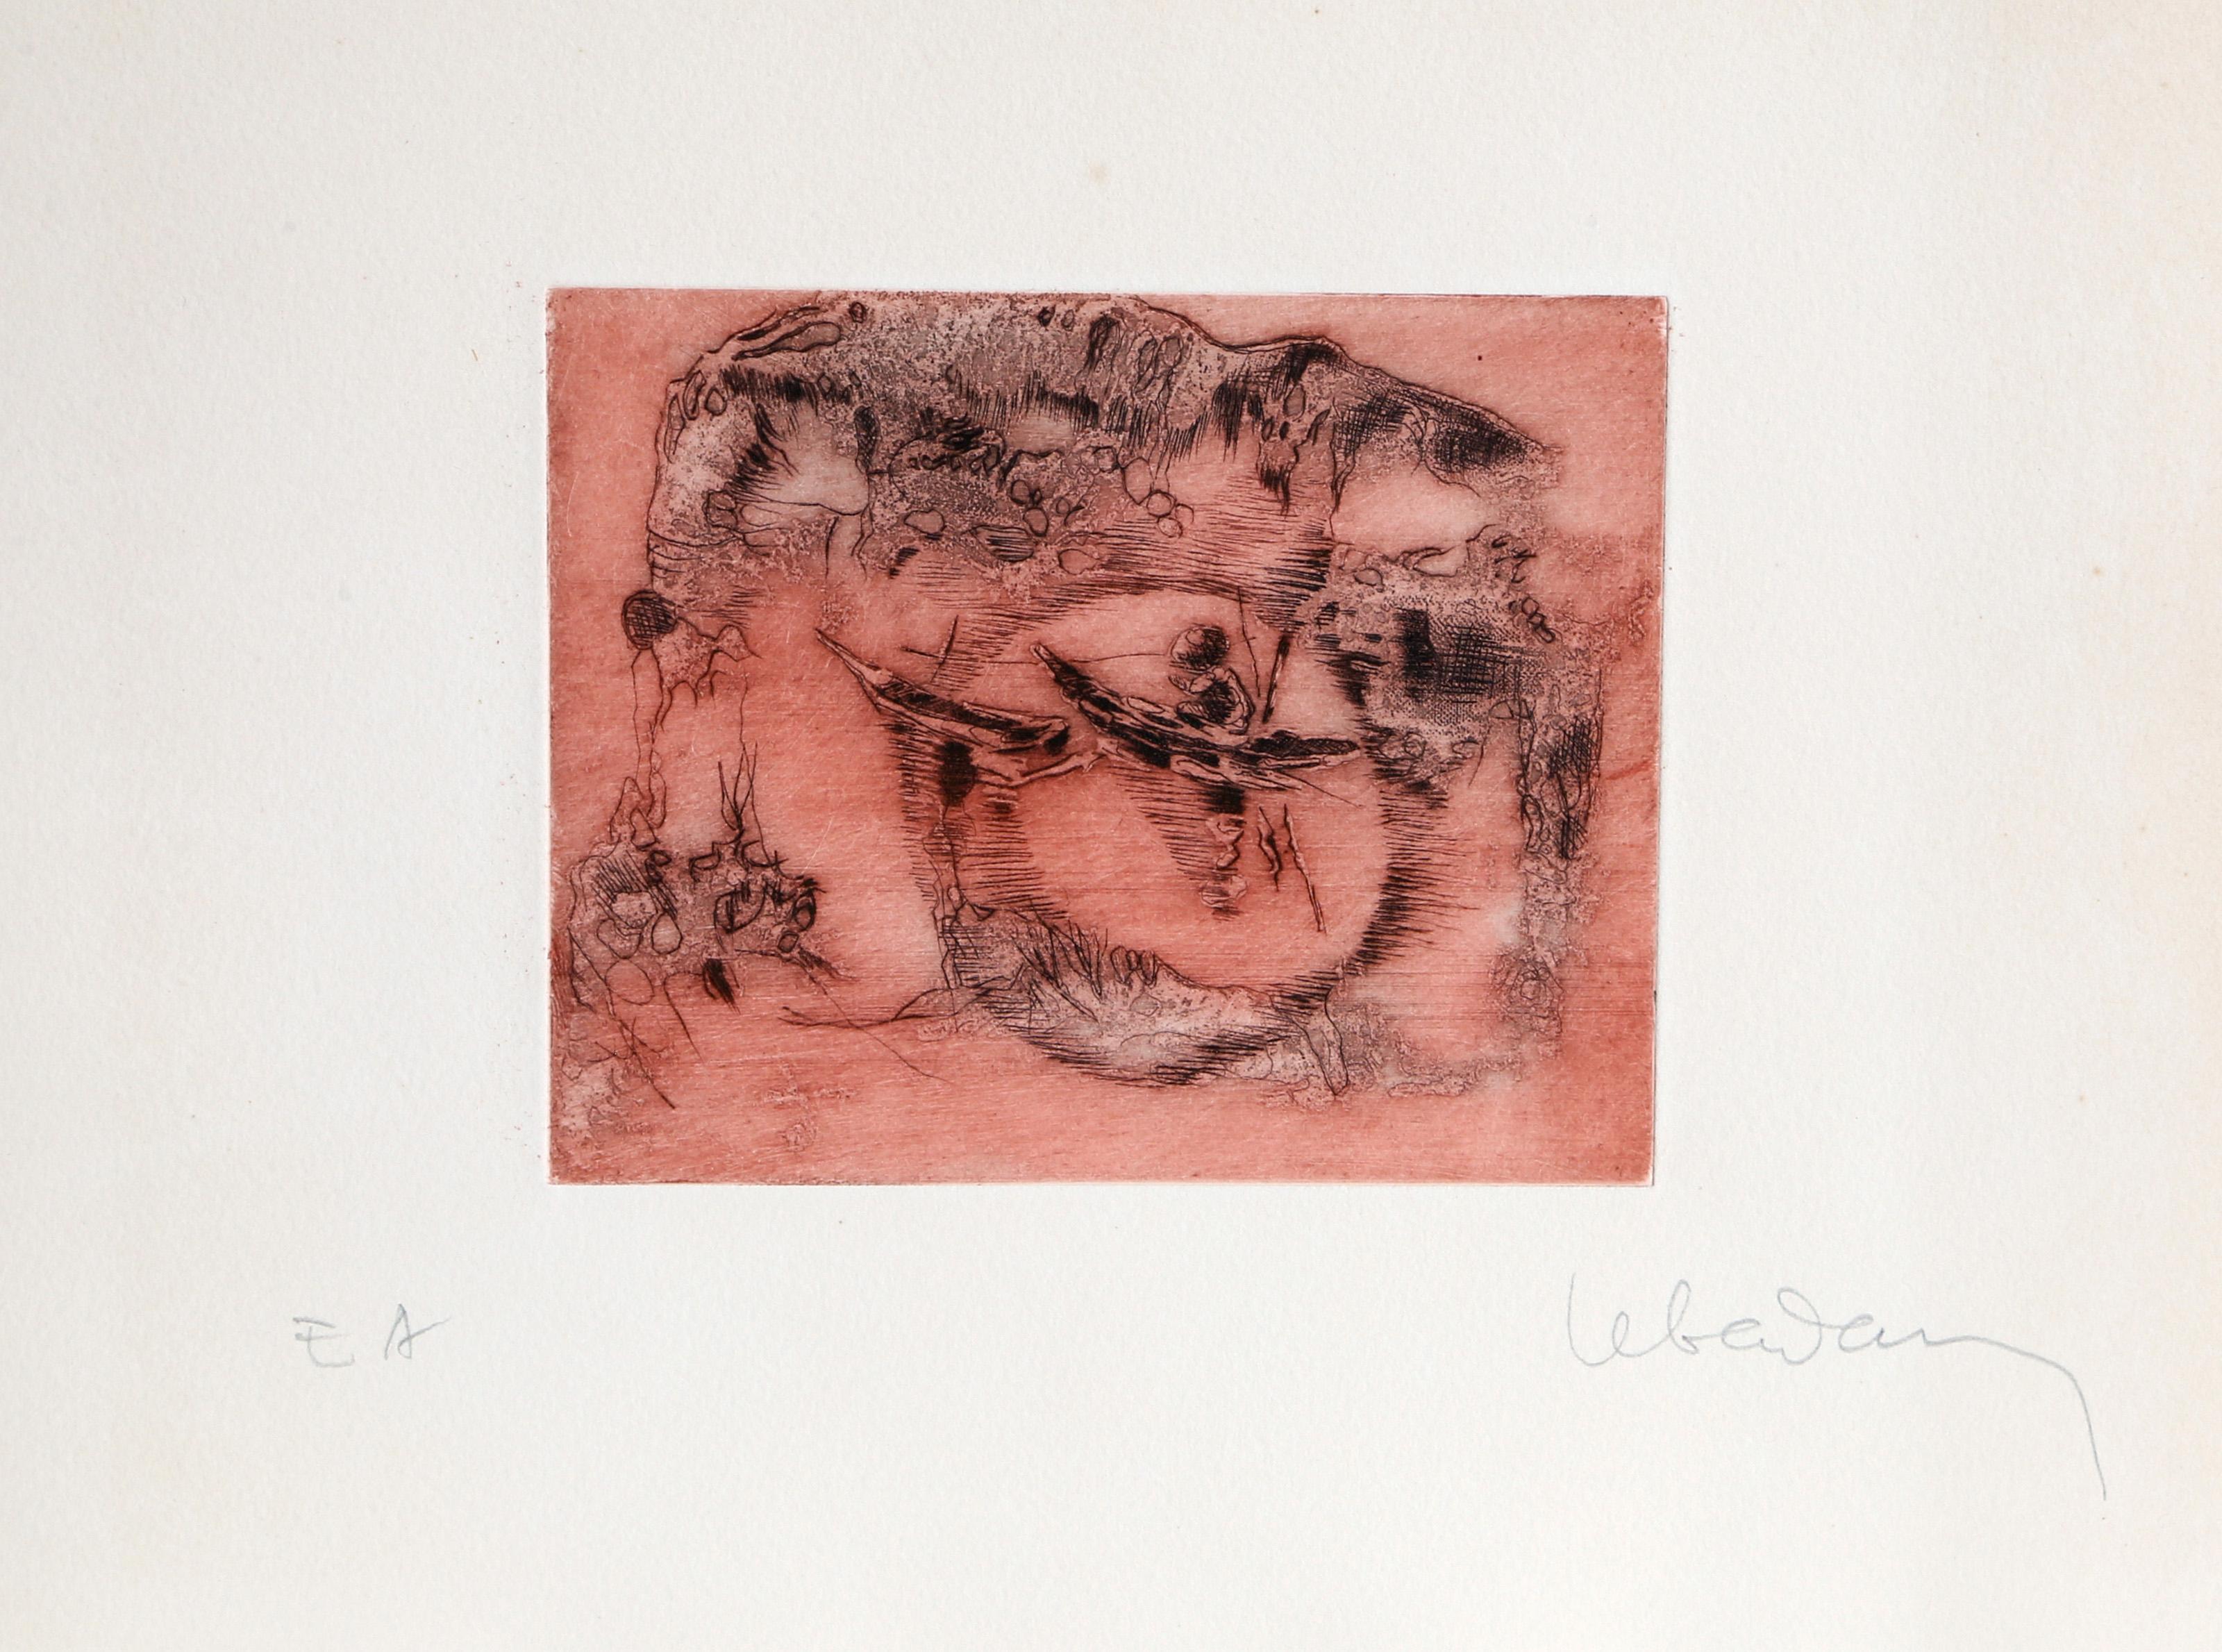 Lebadang (aka Hoi), Vietnamese (1922 - 2015) -  Paddling in the Sun (Red). Year: circa 1982, Medium: Etching with Relief, signed in pencil, Edition: EA, Image Size: 5 x 6 inches, Size: 9.5  x 10 in. (24.13  x 25.4 cm) 